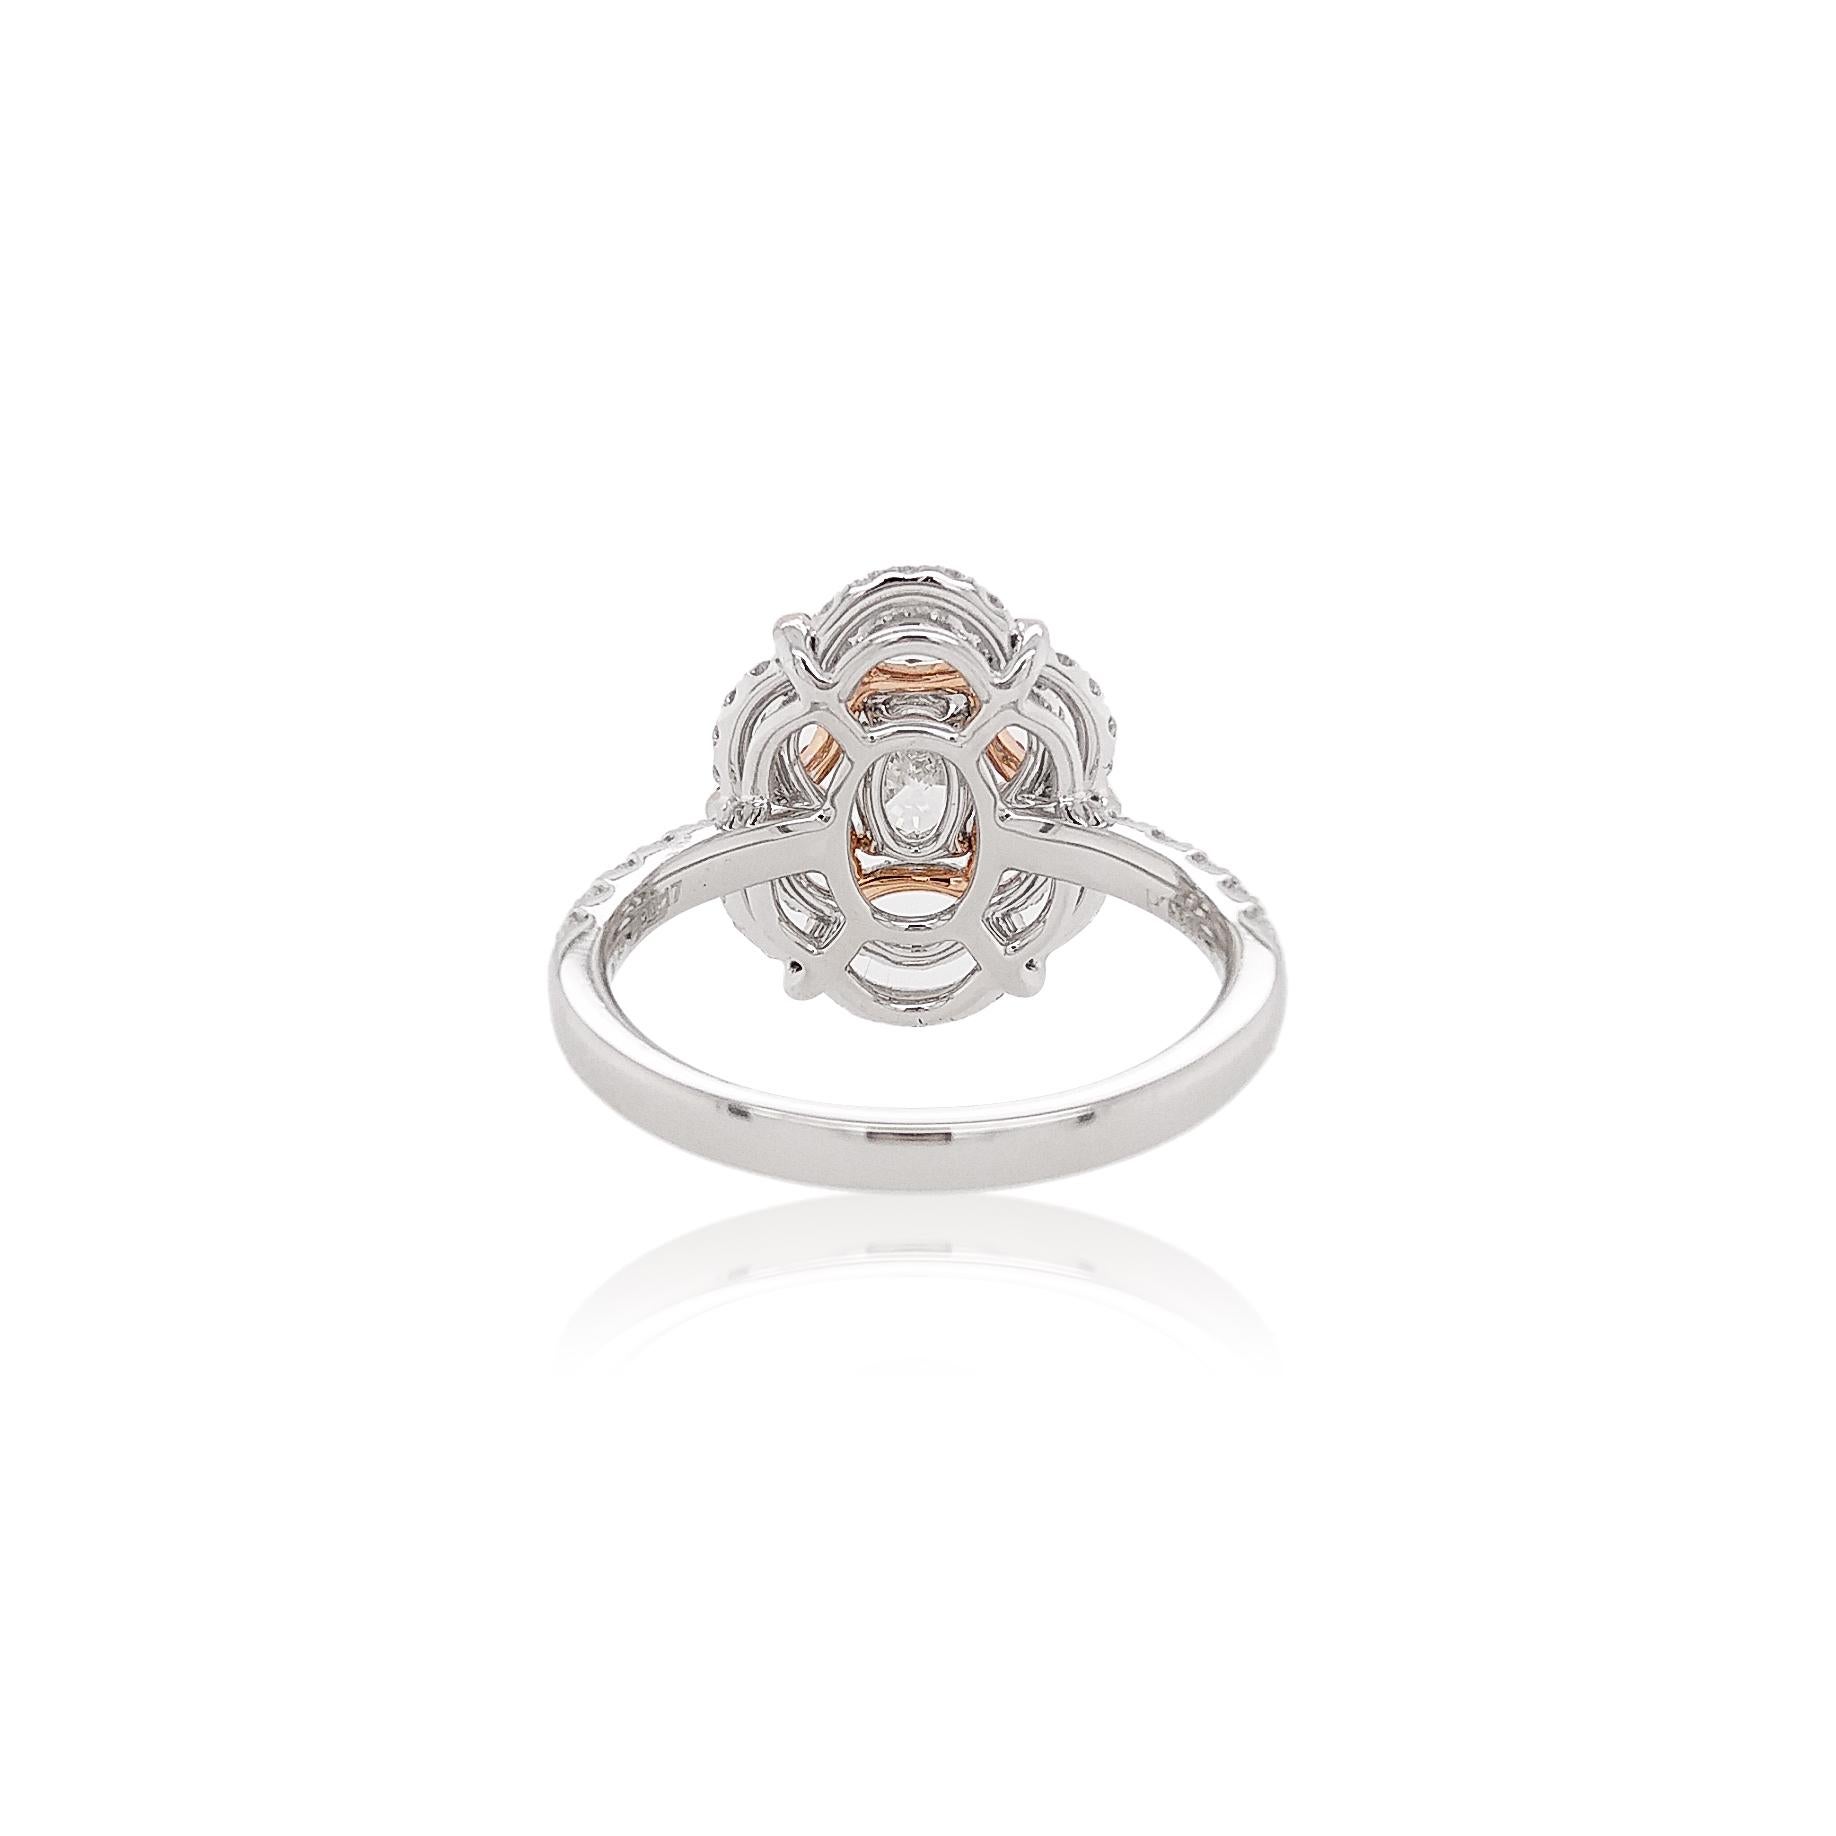 This elegant Platinum ring features a spectacular, GIA certified Oval White Diamond set amongst a floral Argyle Pink Diamonds motif. Dazzling and playful, this spectacular cocktail ring will add a touch of elegance to any outfit. Handcrafted by our